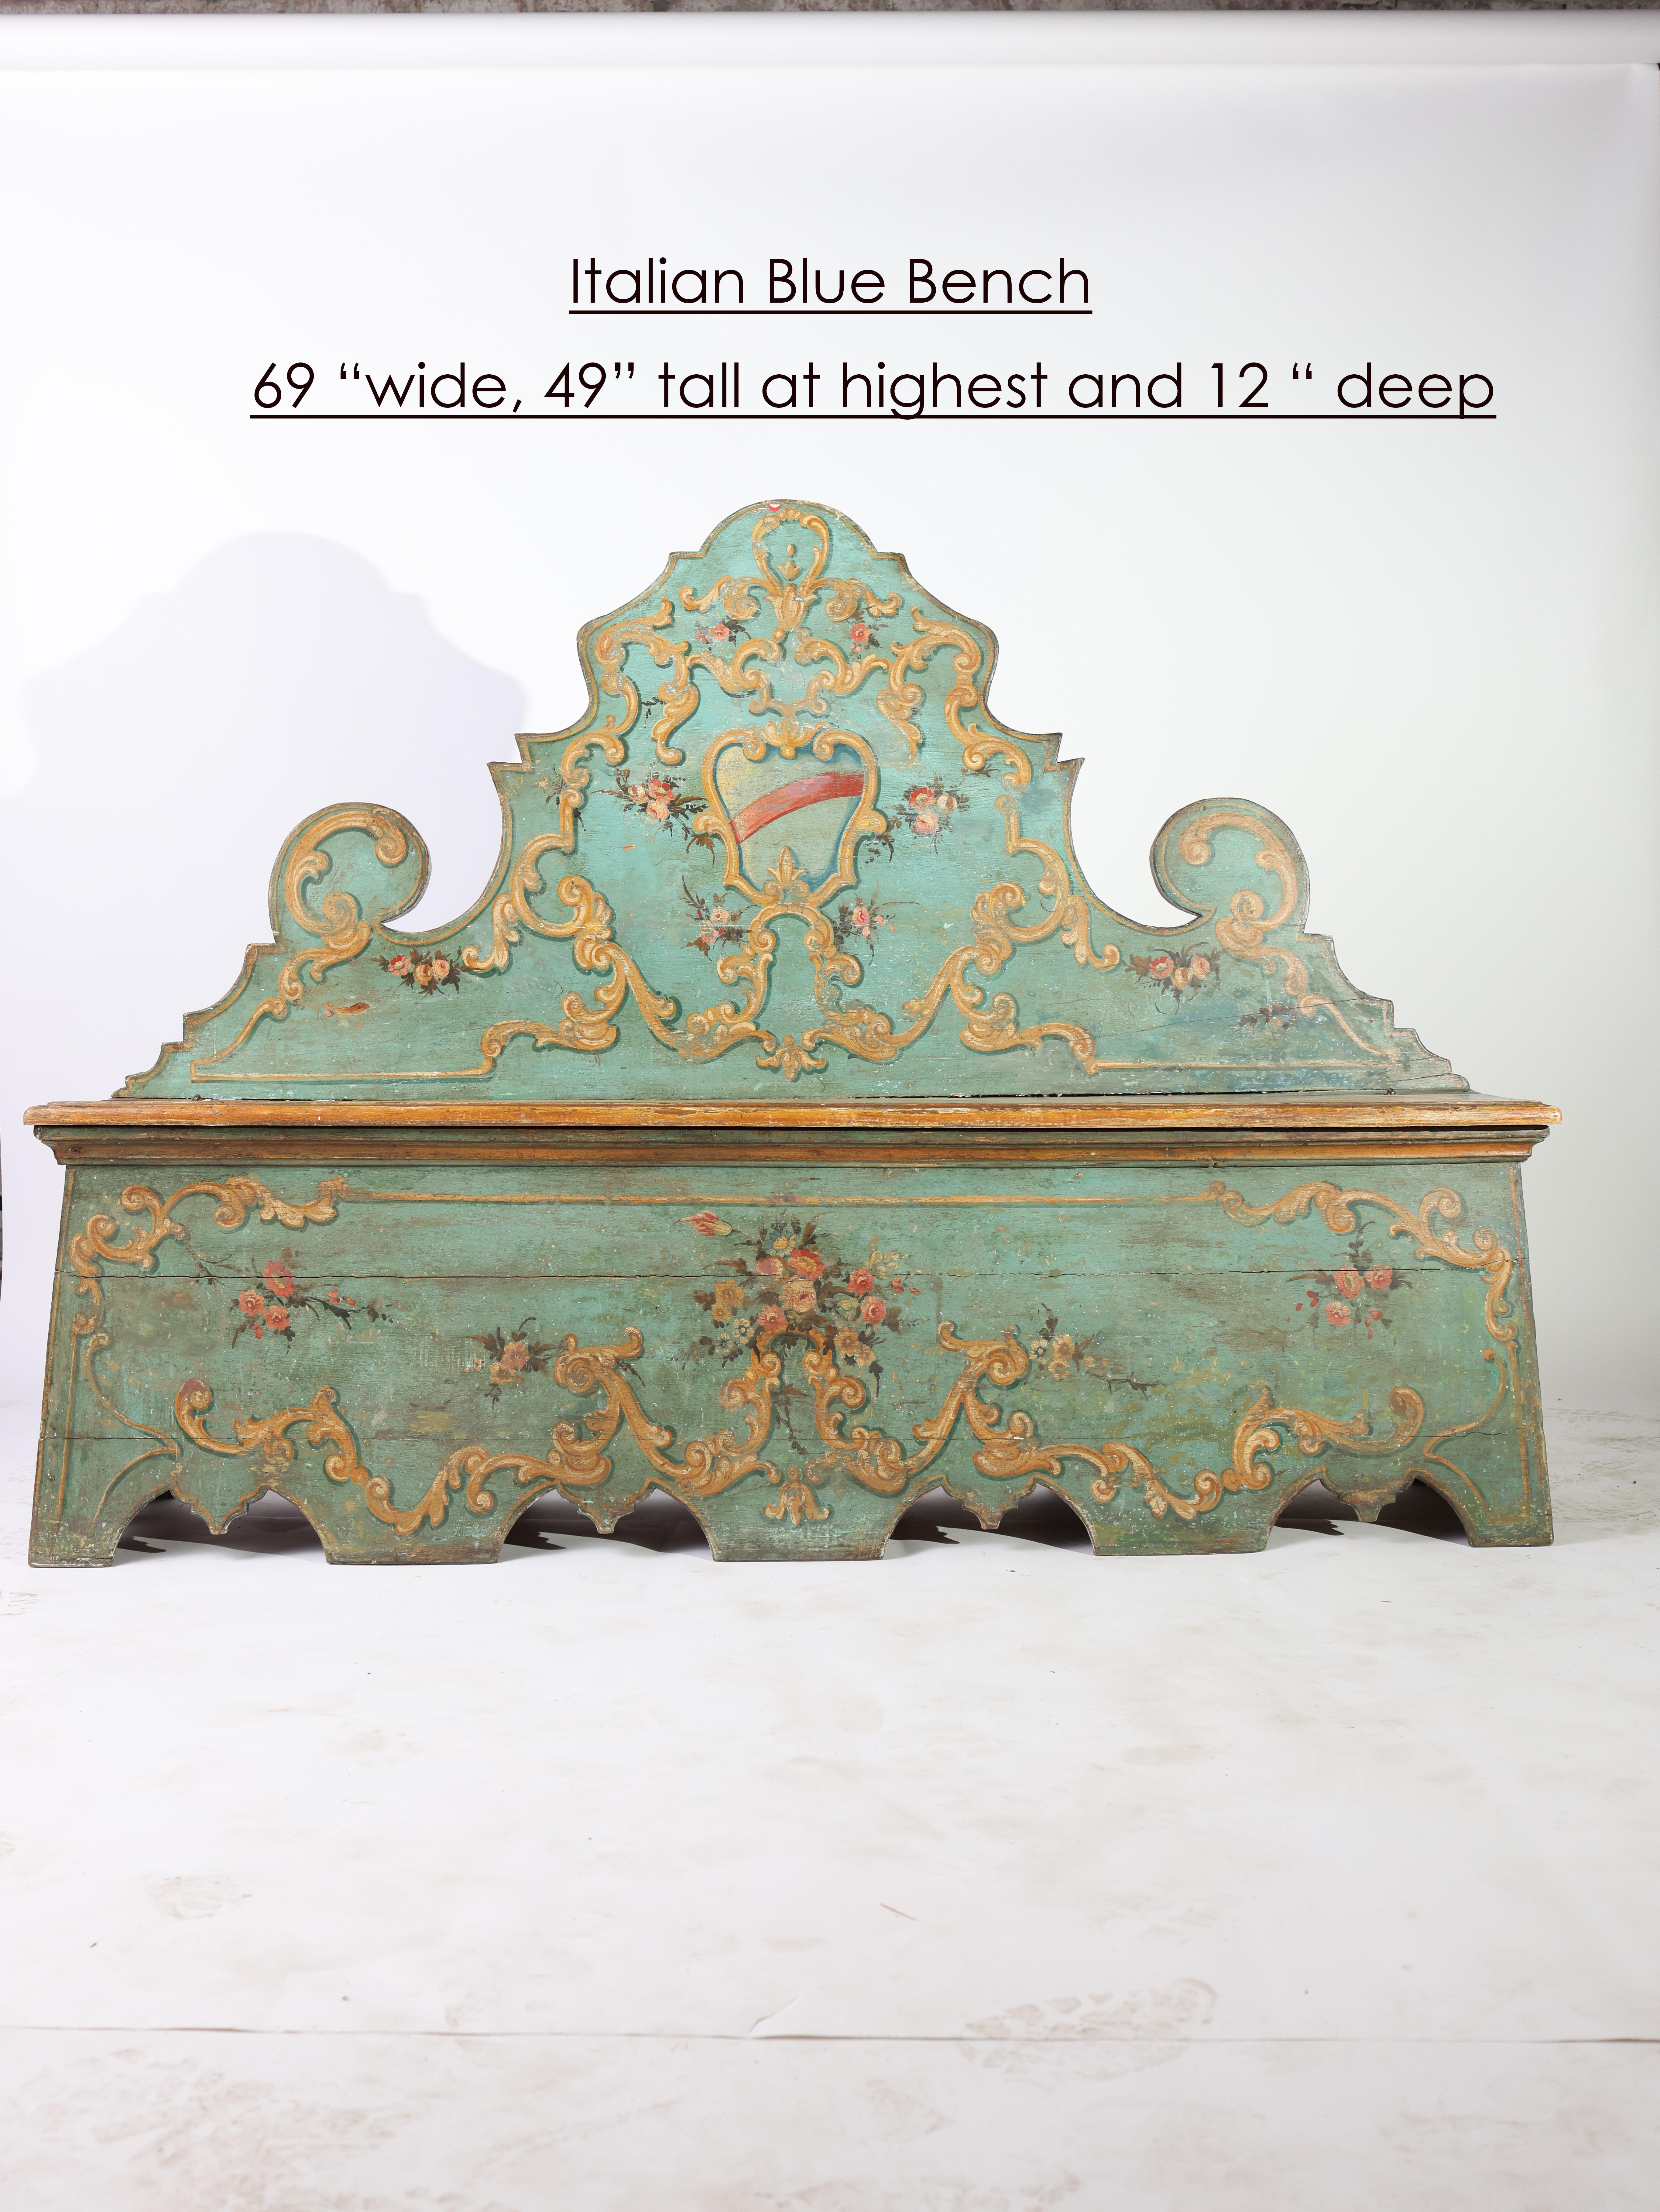 The incredible hand painted floral details on this stunning Italian bench make it a breathtaking piece of art. Carved gilt embellishments adorn the vibrant blue bench with a crest cartouche at center. 

This remarkable I8th century Italian piece